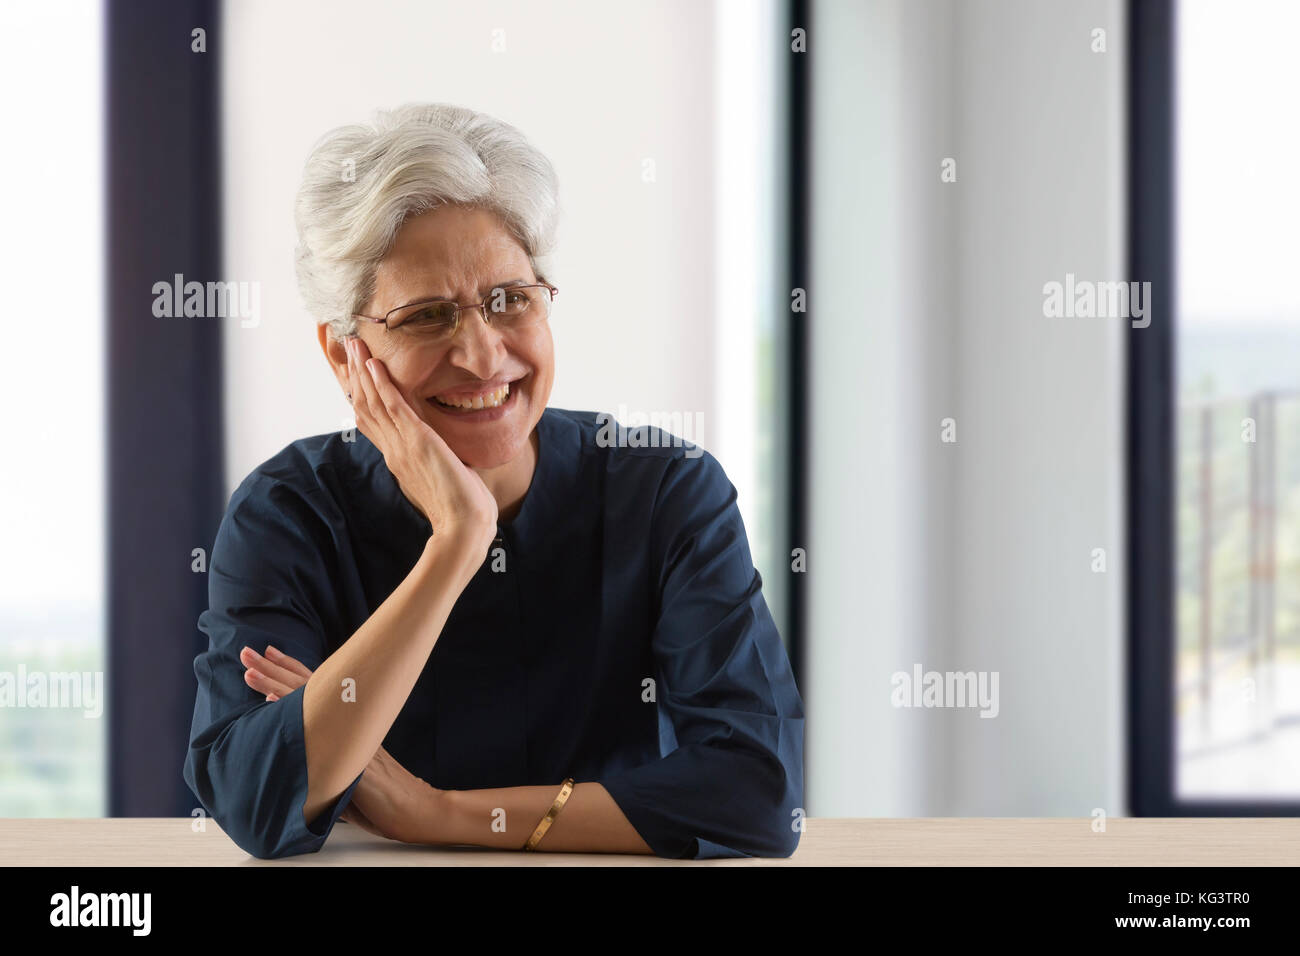 Smiling senior woman with hand on chin looking away Banque D'Images